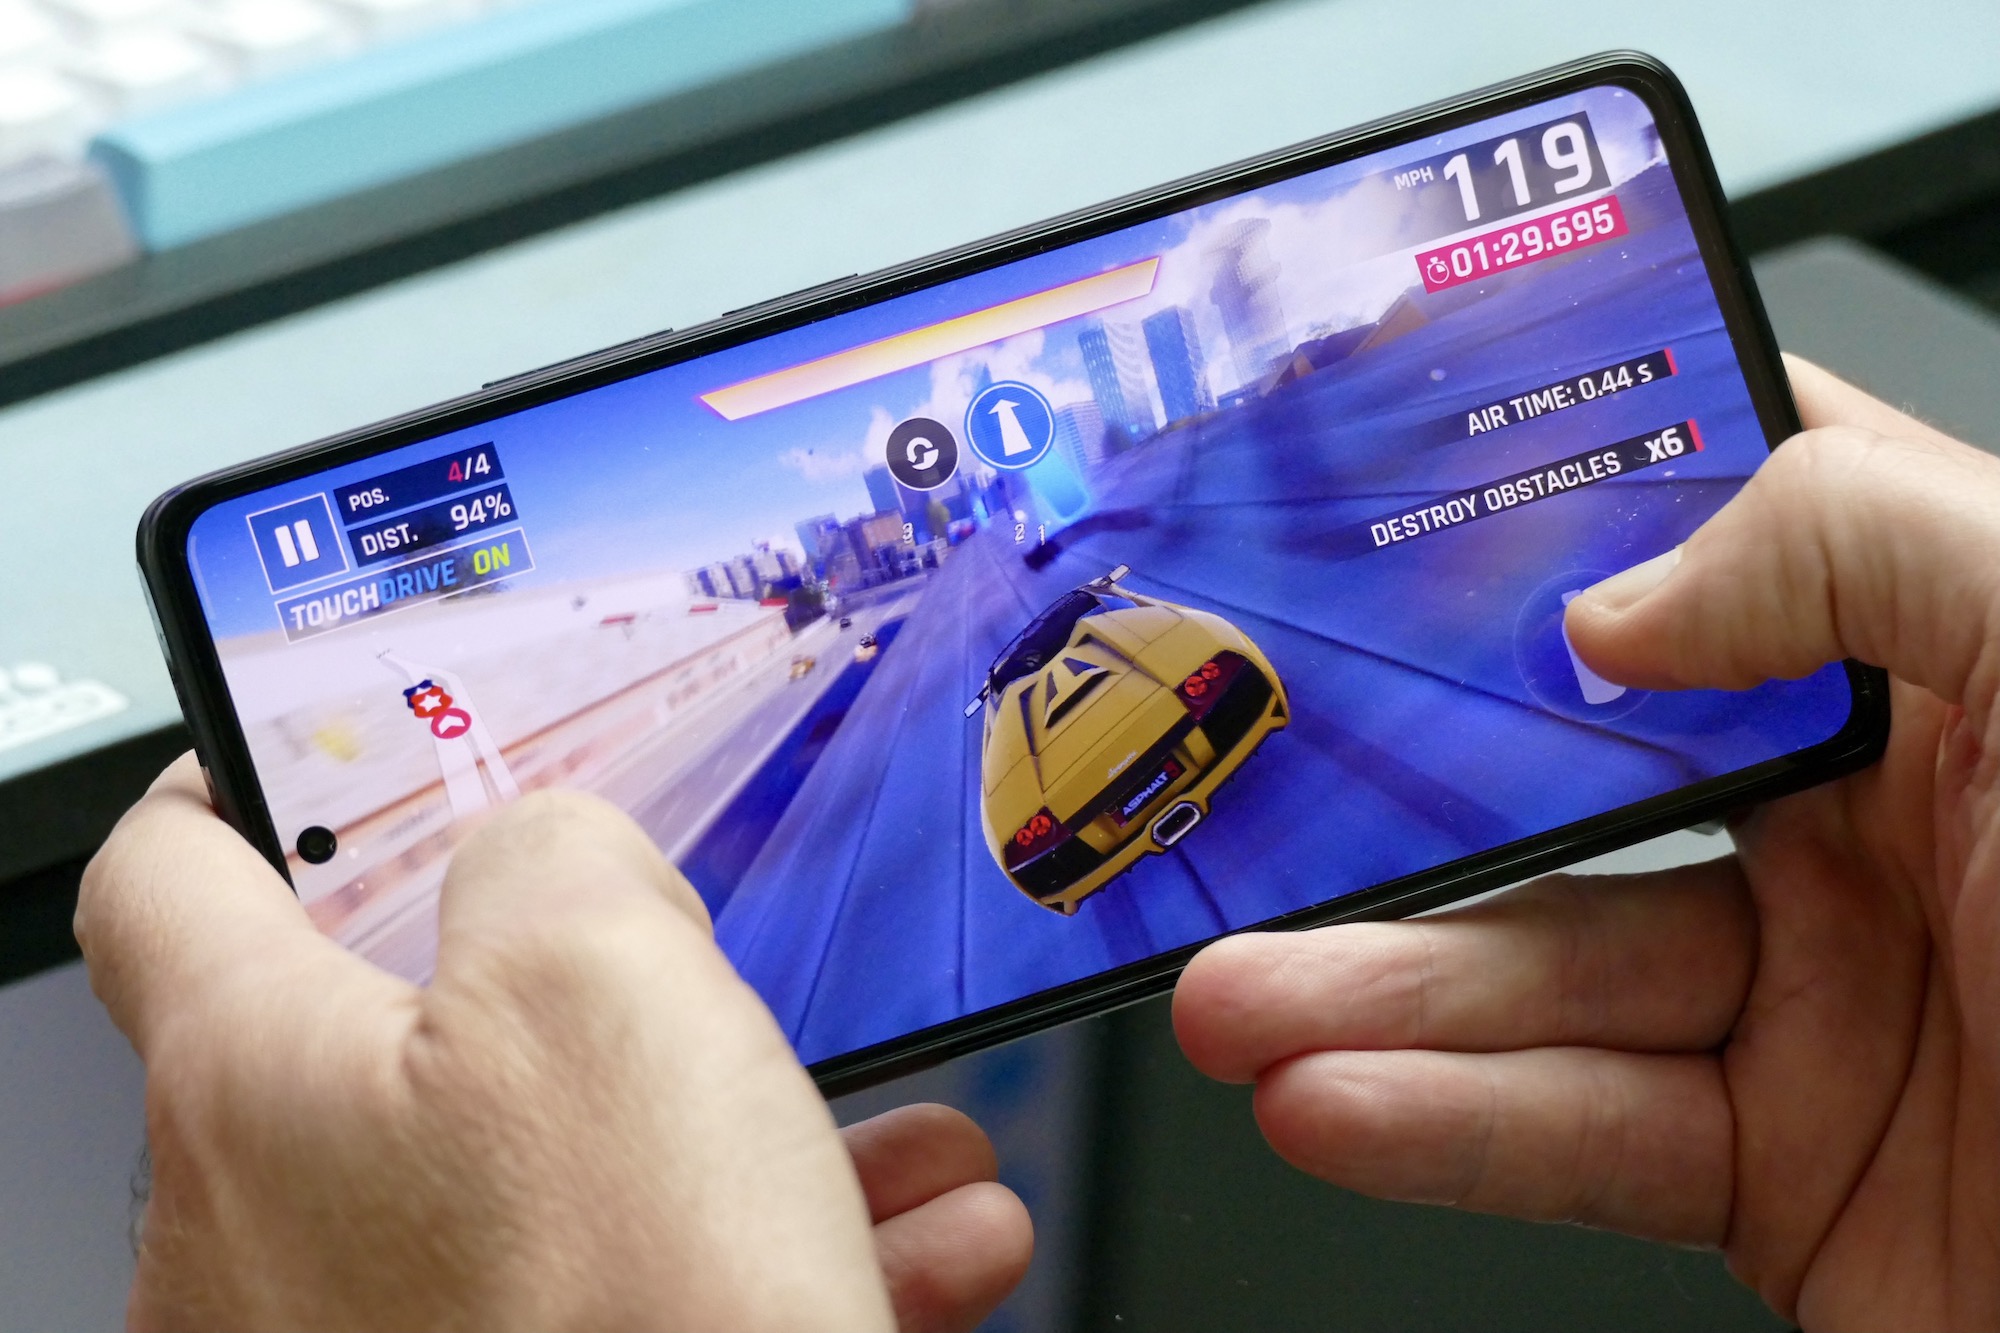 Xiaomi 11T Pro performance throttling experienced in games like